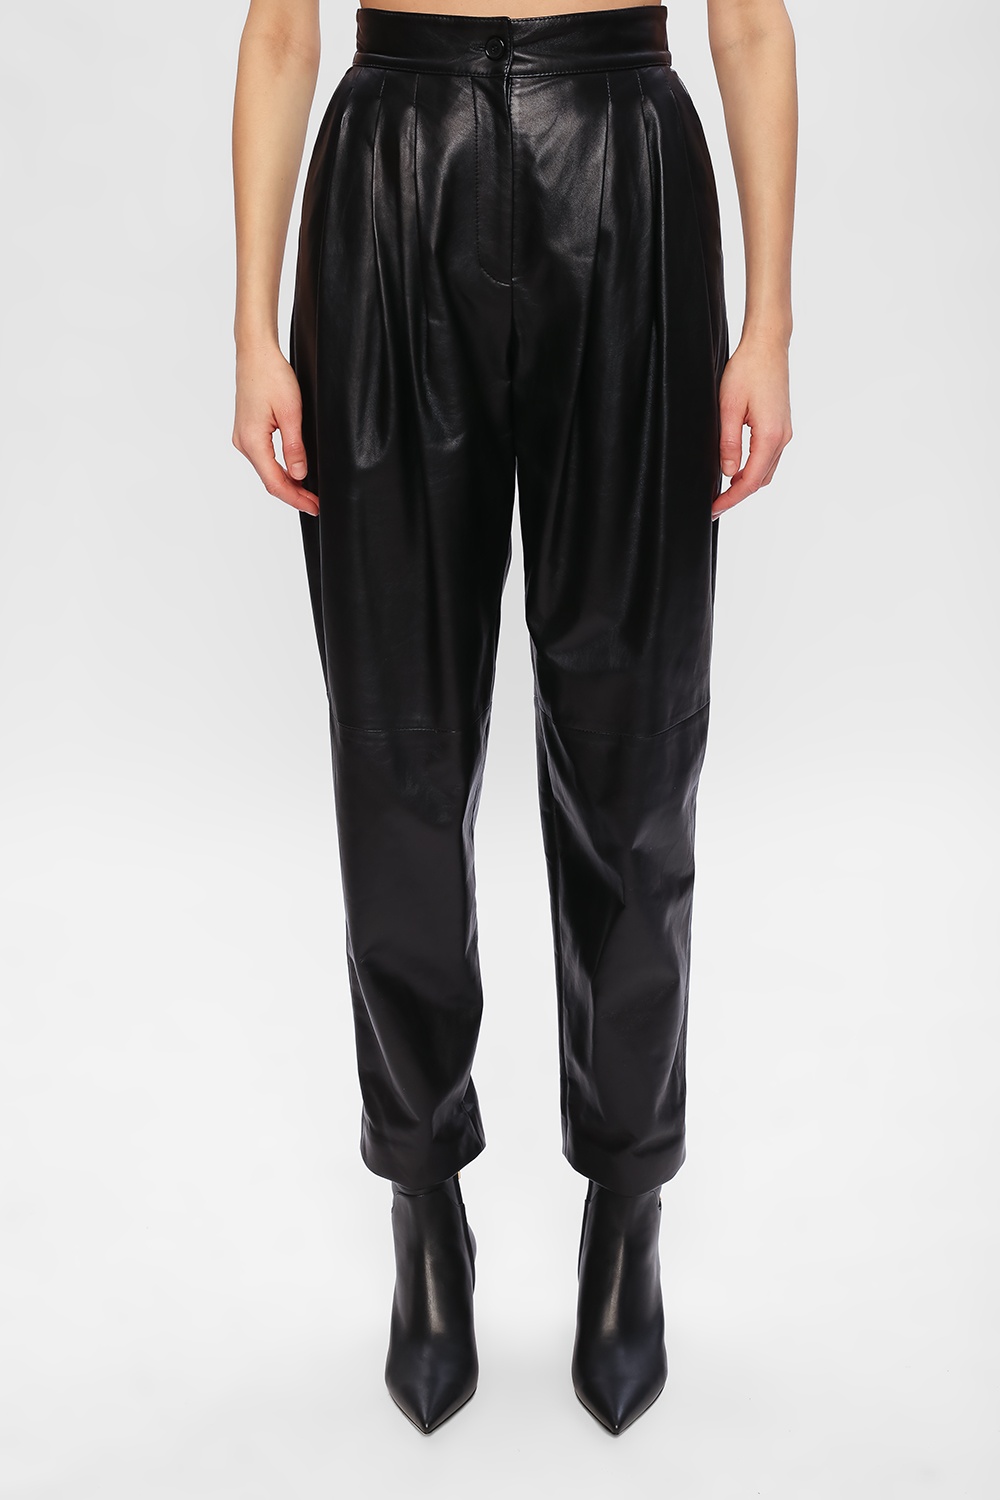 Dolce & Gabbana Leather trousers